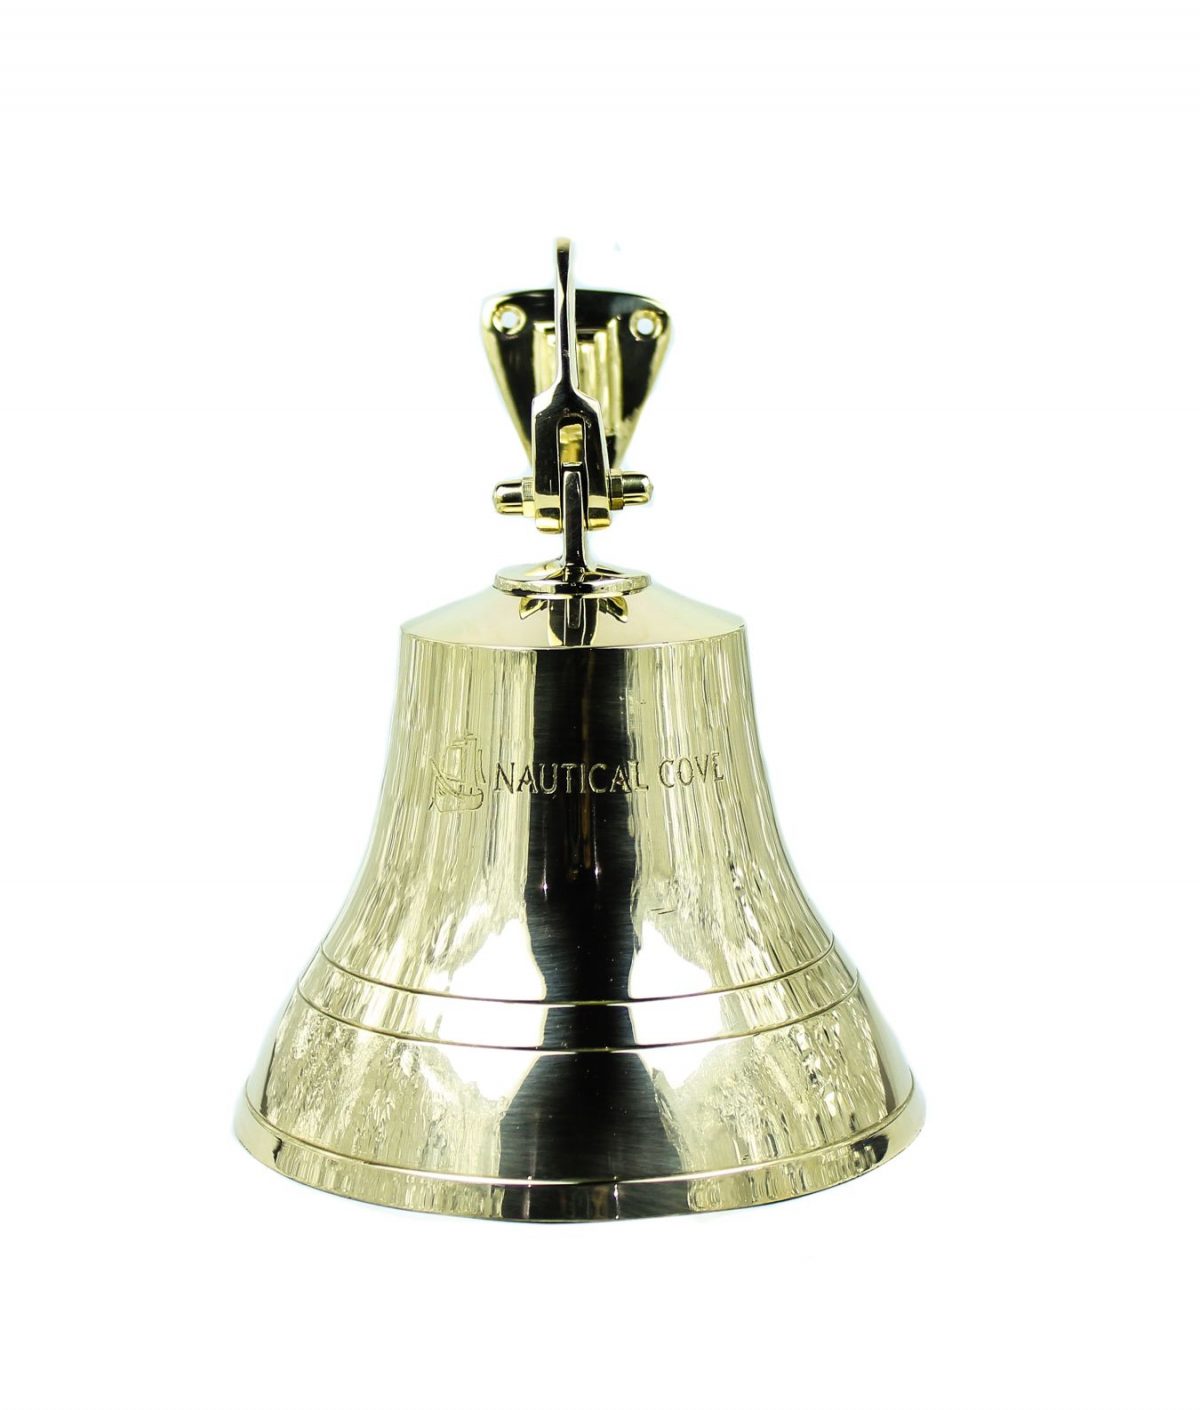 Nagina International Nautical Cove Solid Brass Ships Bell 6" Tall and Wall Mountable - Clear Ring for Indoor and Outdoor Use